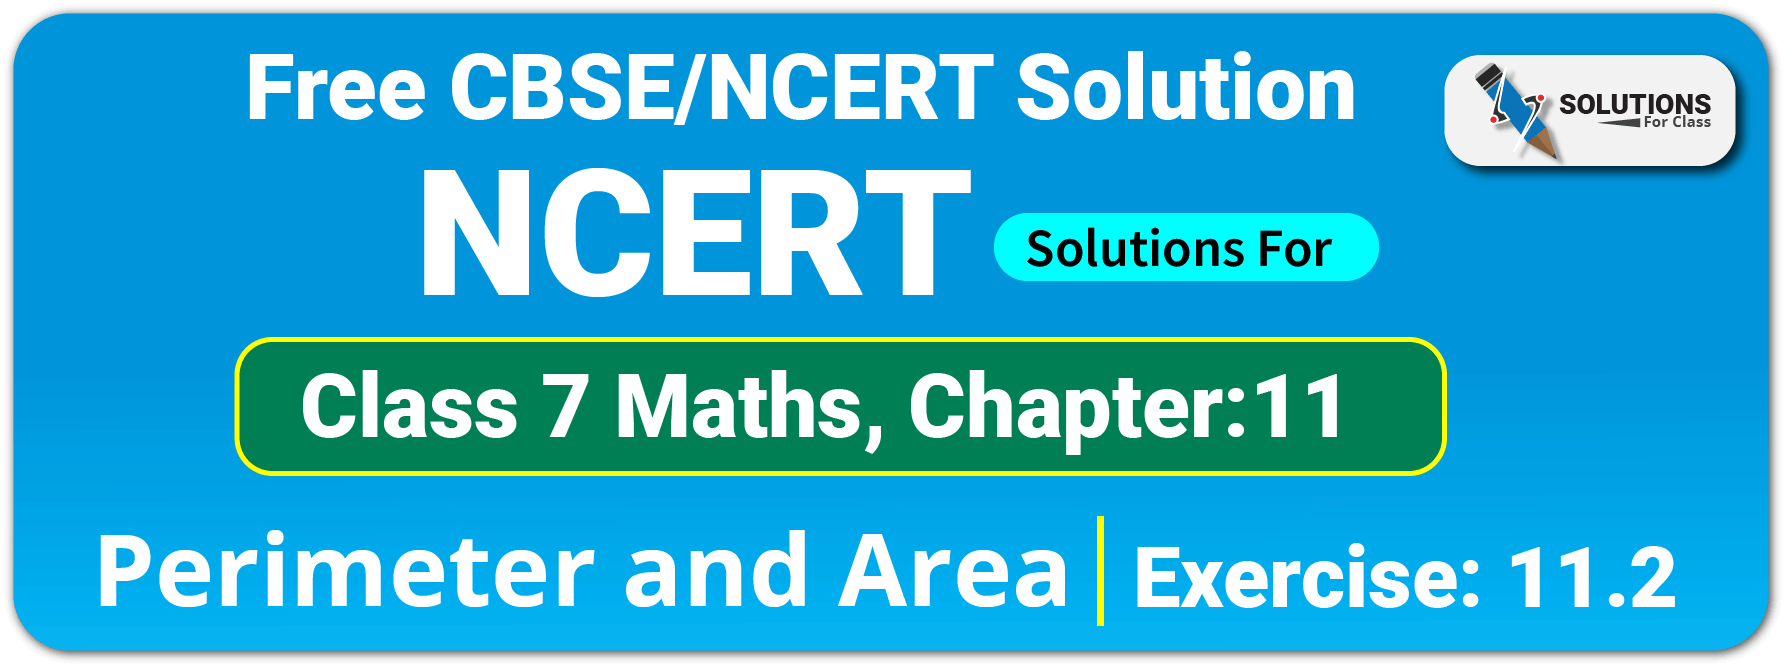 NCERT Solutions For Class 7 Maths Chapter 11 Perimeter and Area Exercise 11.2